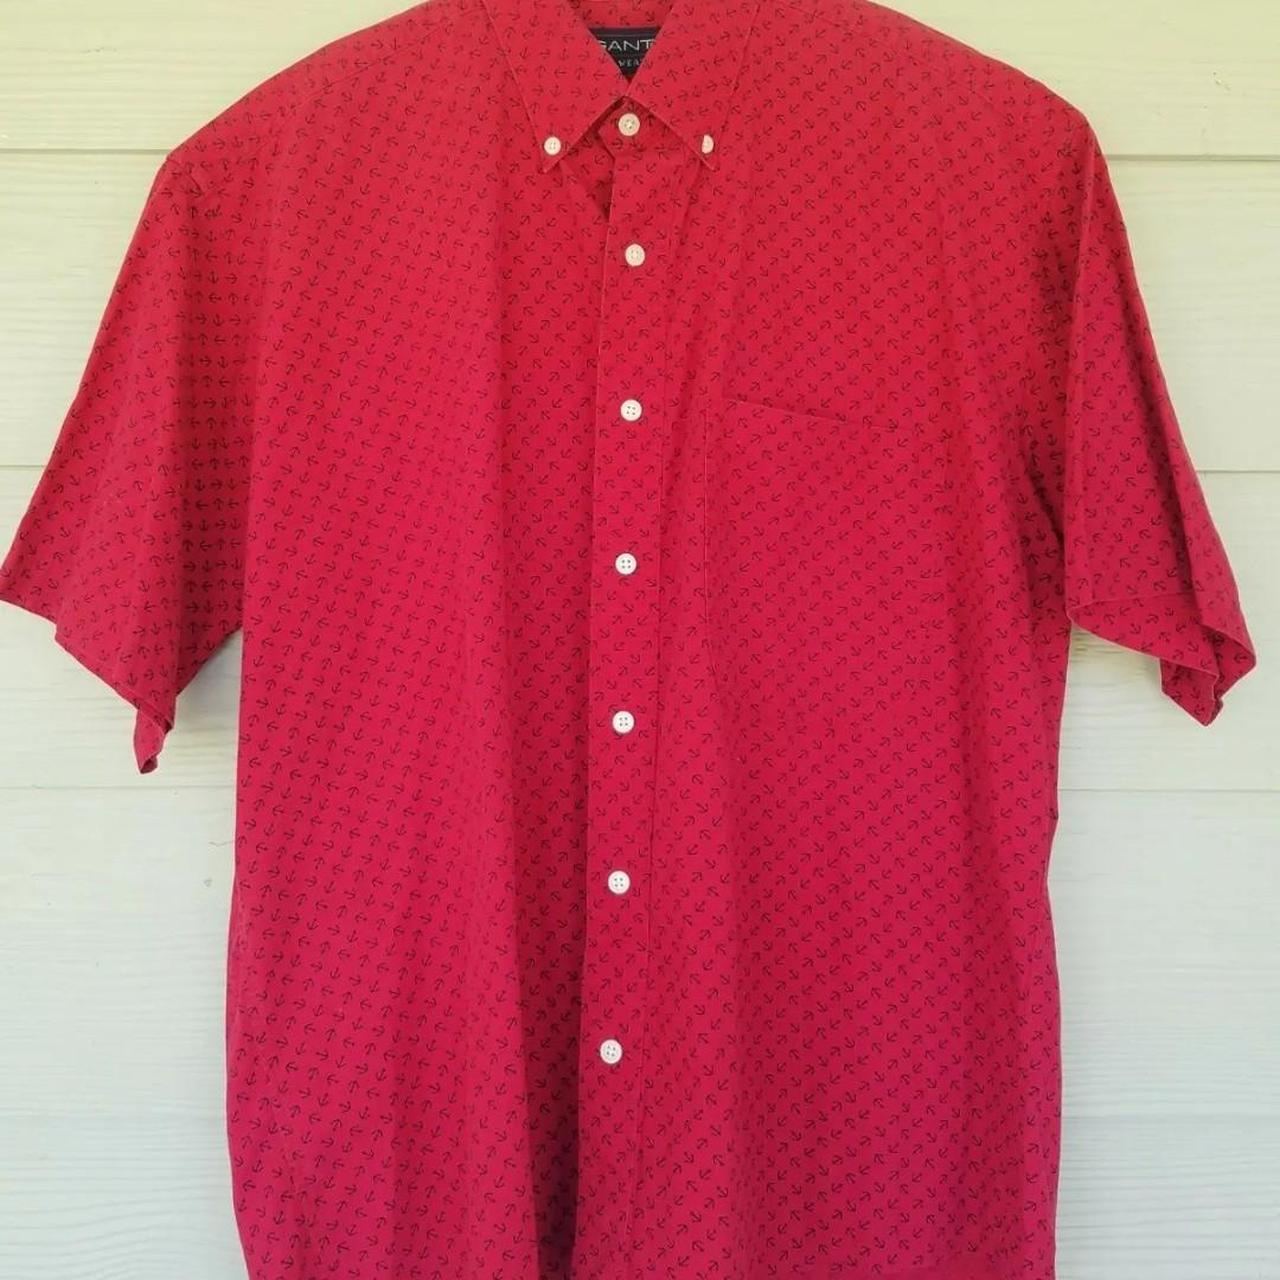 GANT Men's Red and Blue Shirt (4)